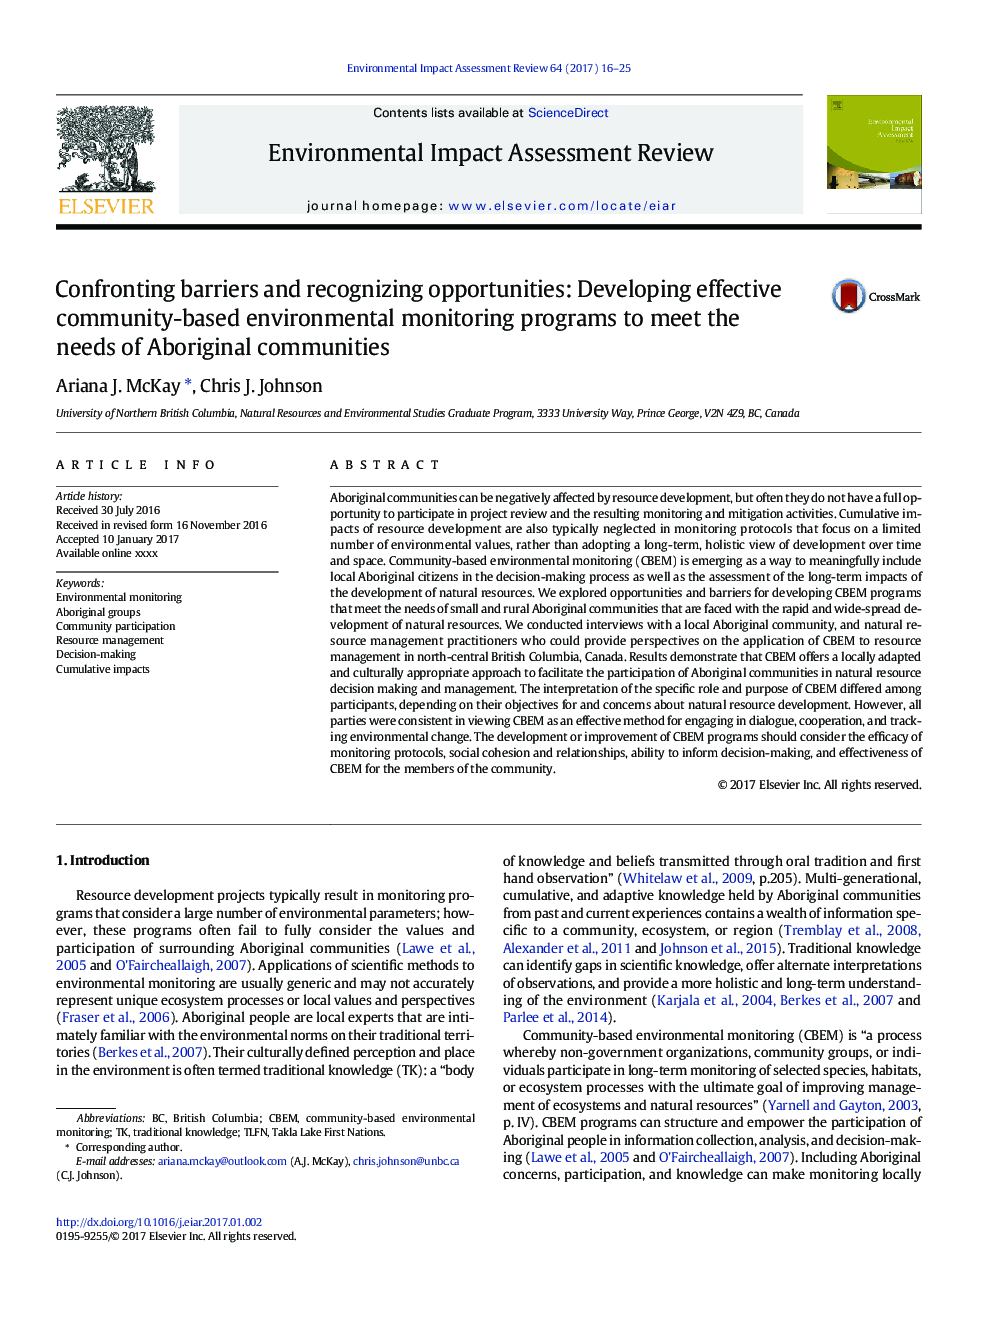 Confronting barriers and recognizing opportunities: Developing effective community-based environmental monitoring programs to meet the needs of Aboriginal communities